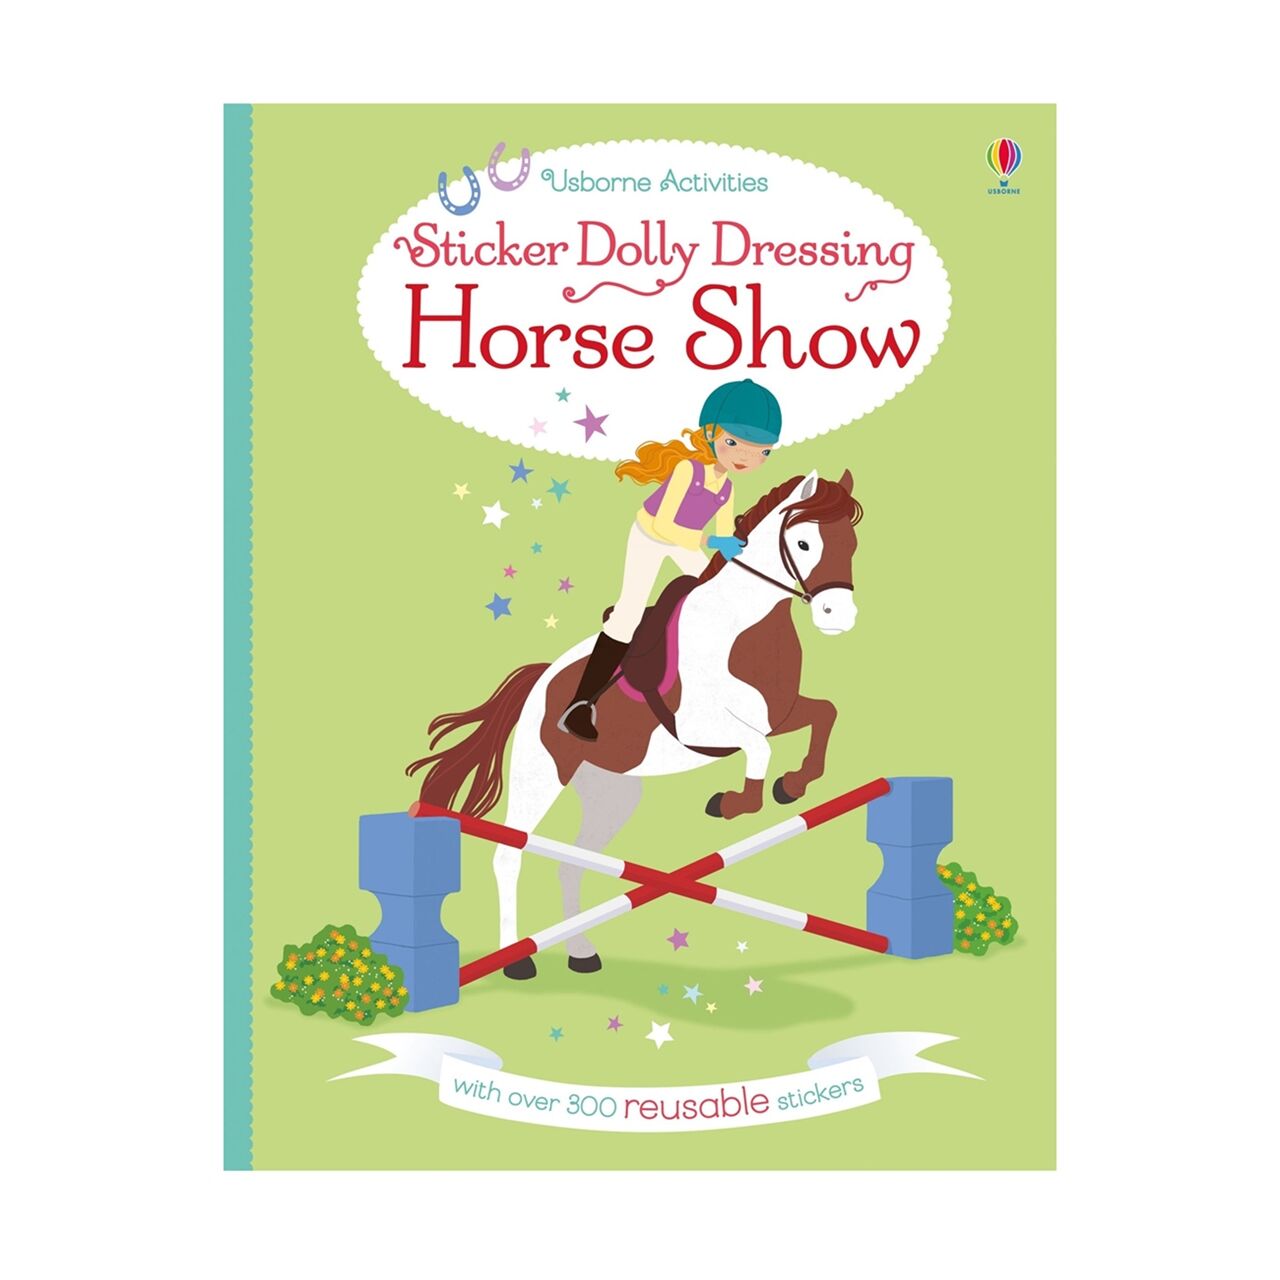 Sticker Dolly Dressing - Horse Show